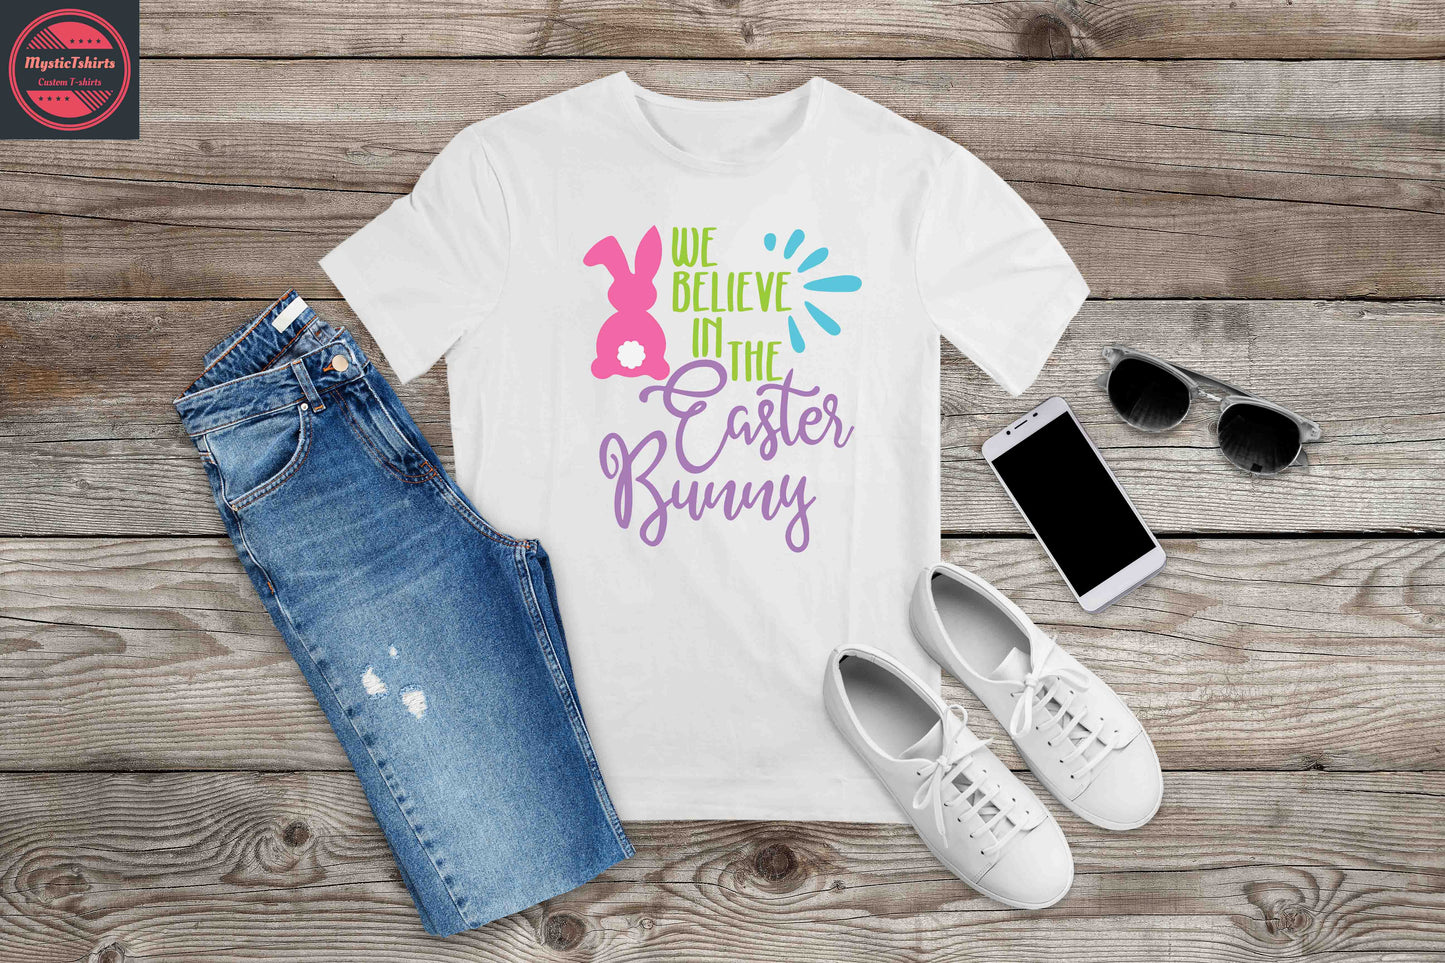 474. WE BELIVE IN THE EASTER BUNNY, Custom Made Shirt, Personalized T-Shirt, Custom Text, Make Your Own Shirt, Custom Tee